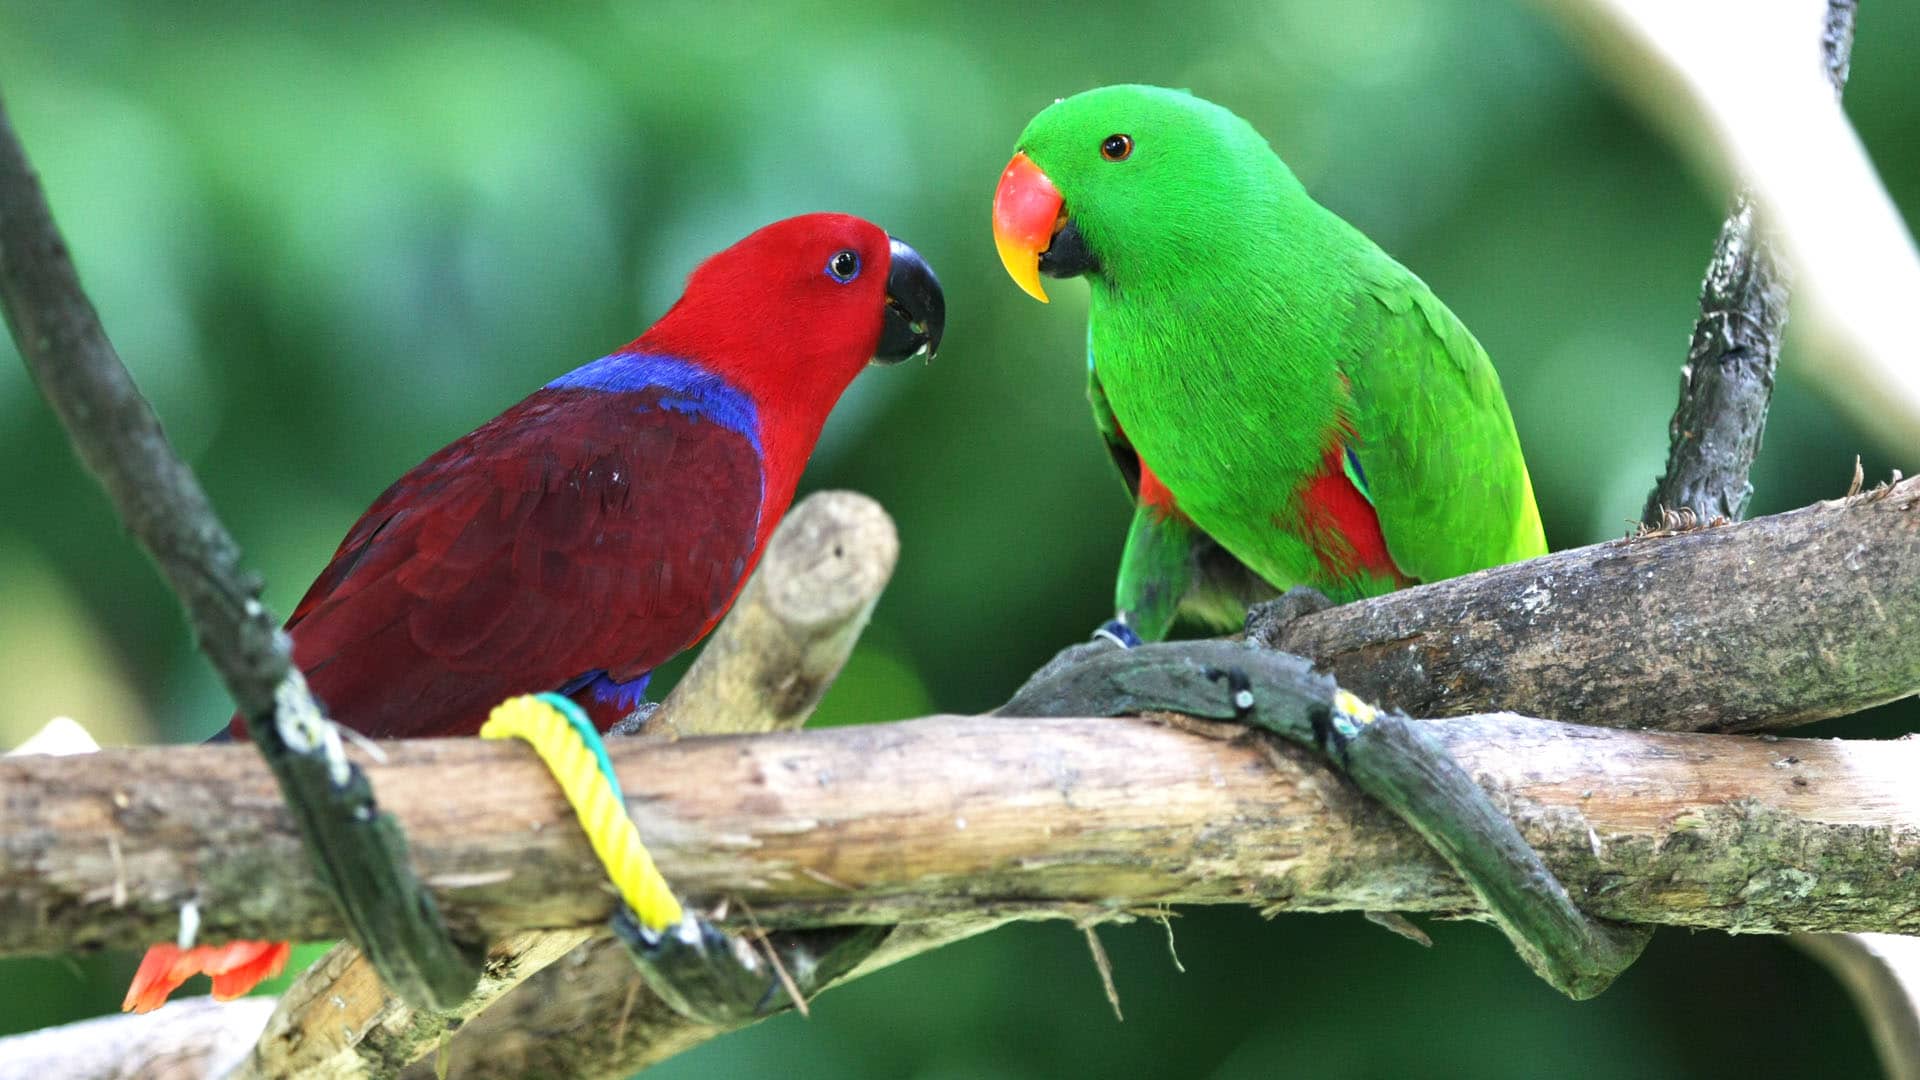 A pair of Eclectus parrots, a species with red females and green males.